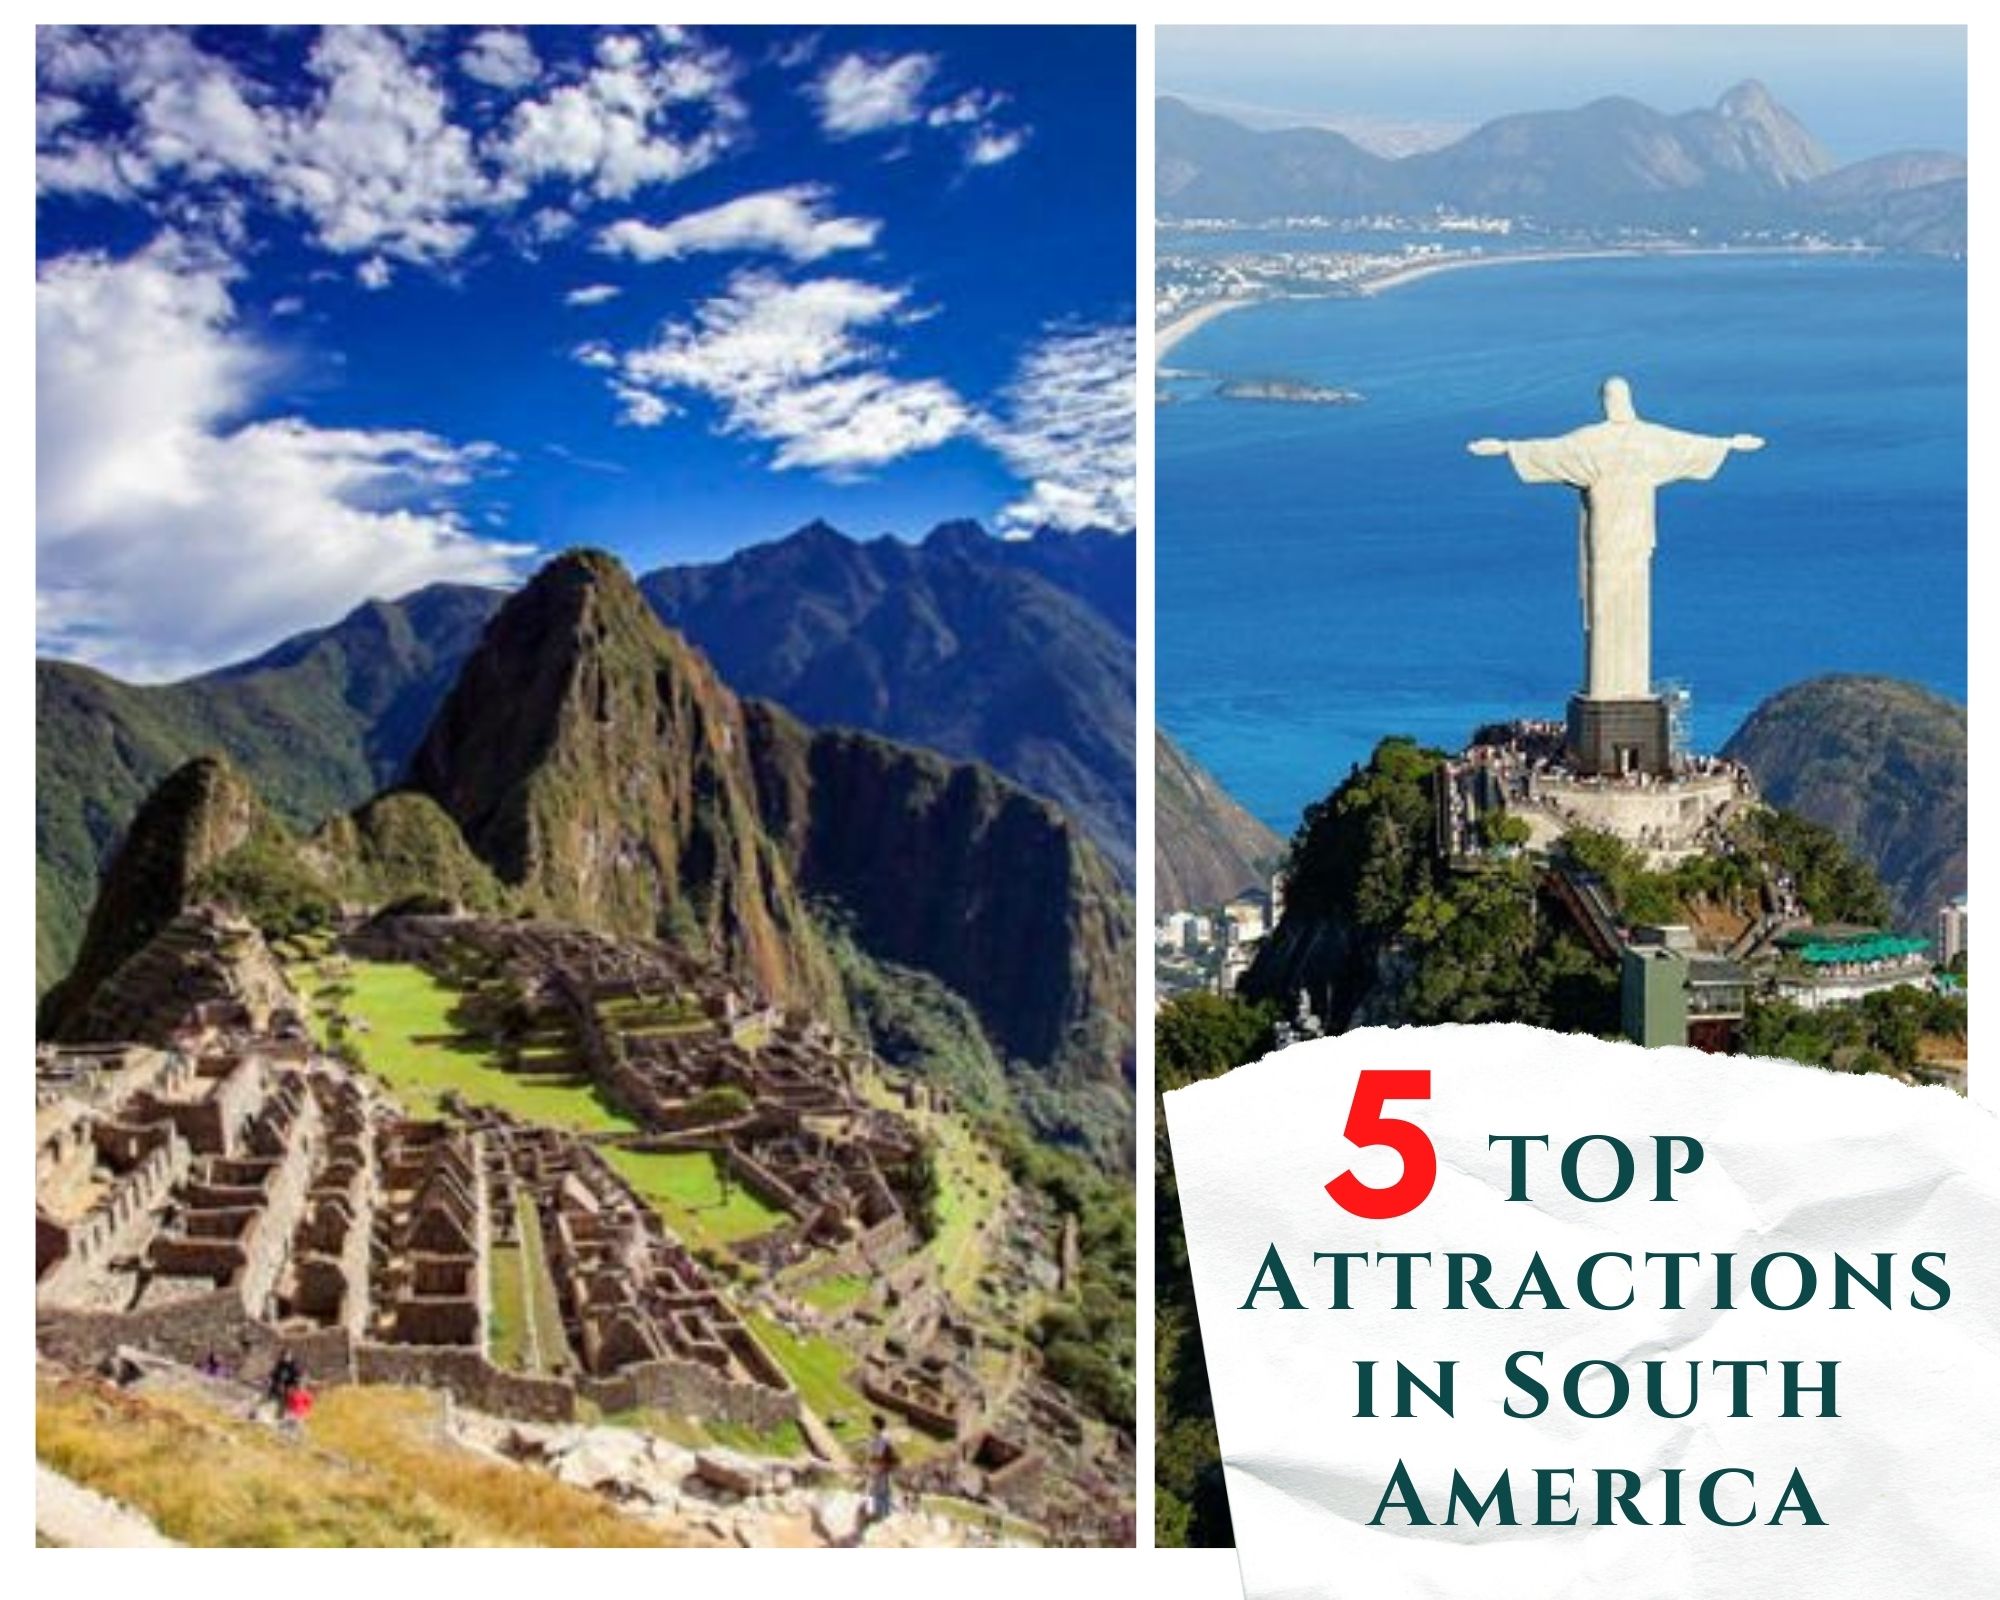 Top attractions in South America